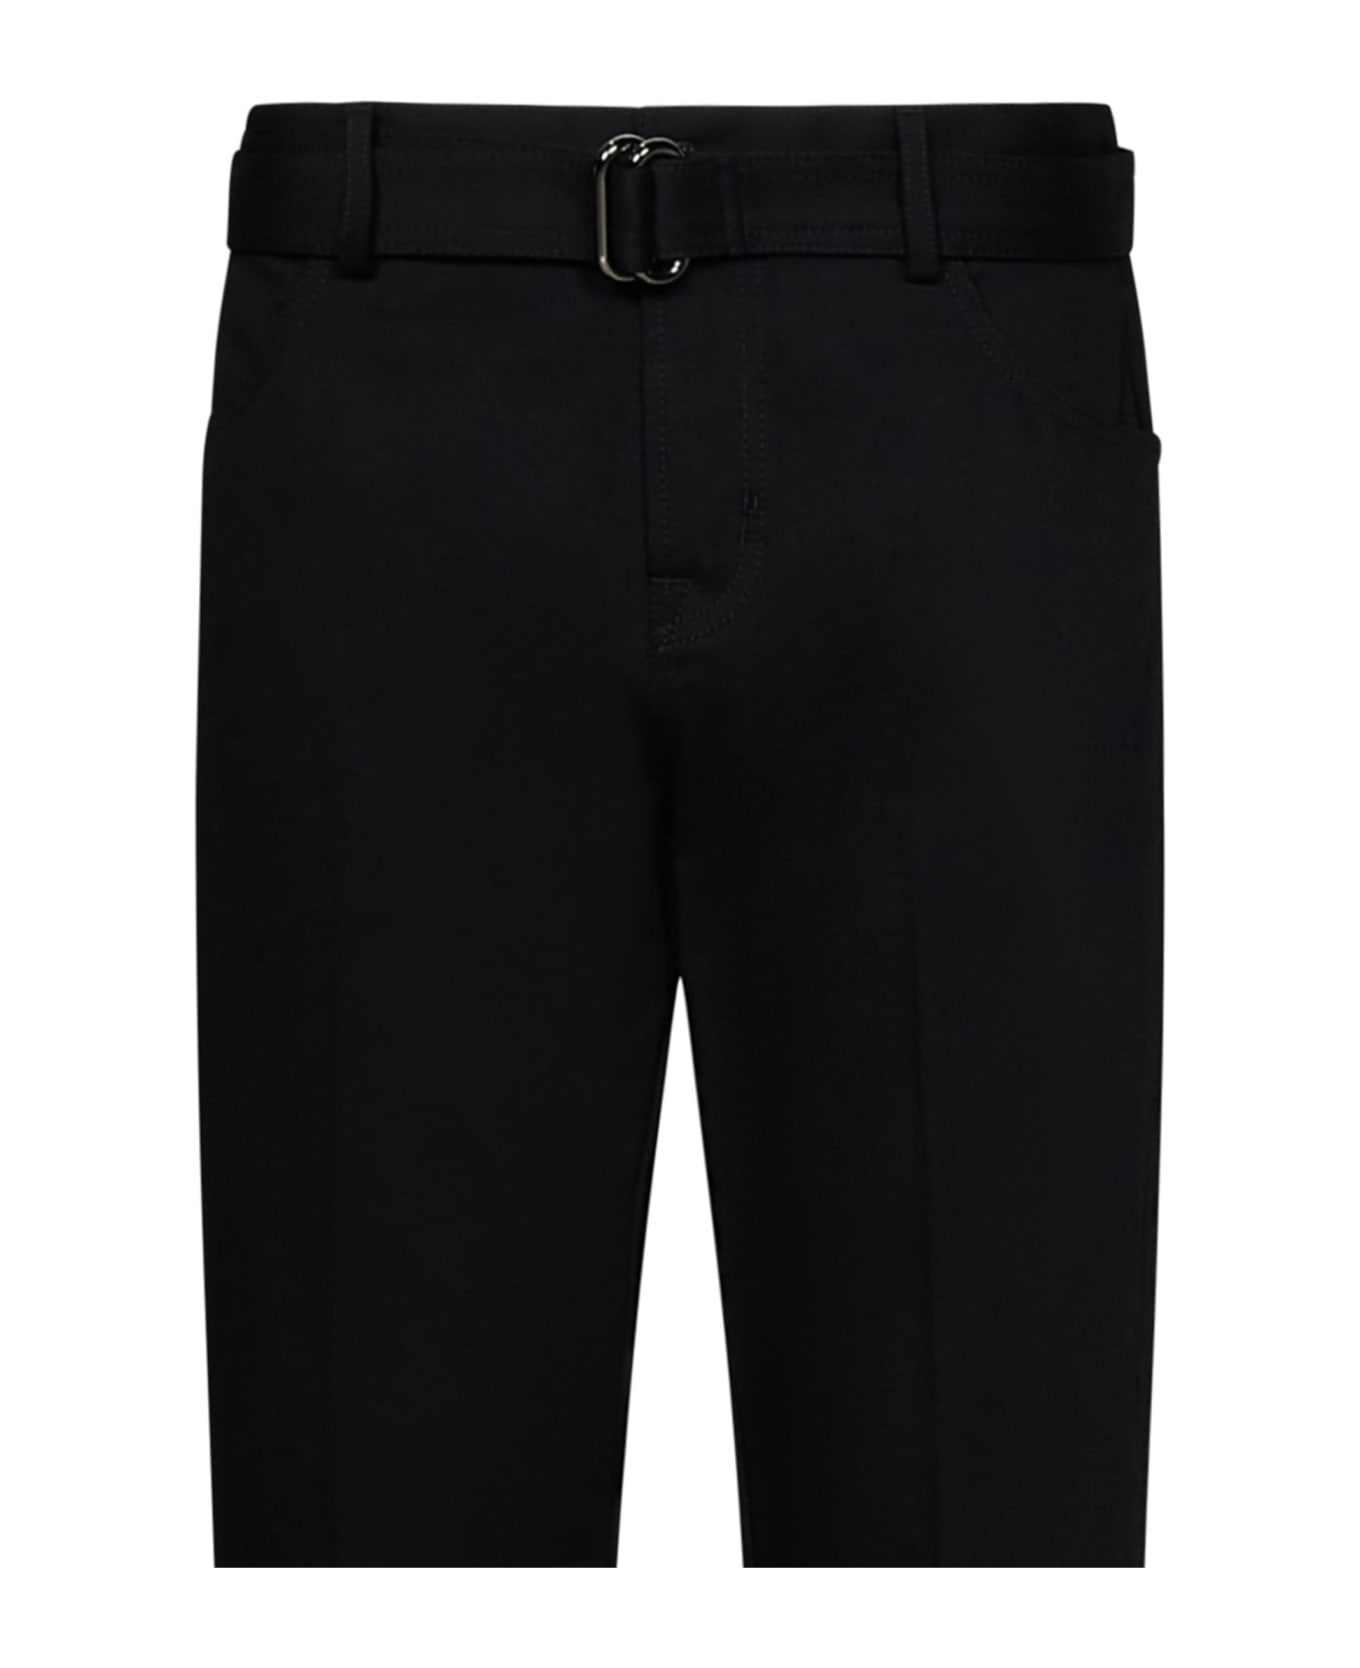 Tom Ford Trousers - Black ボトムス